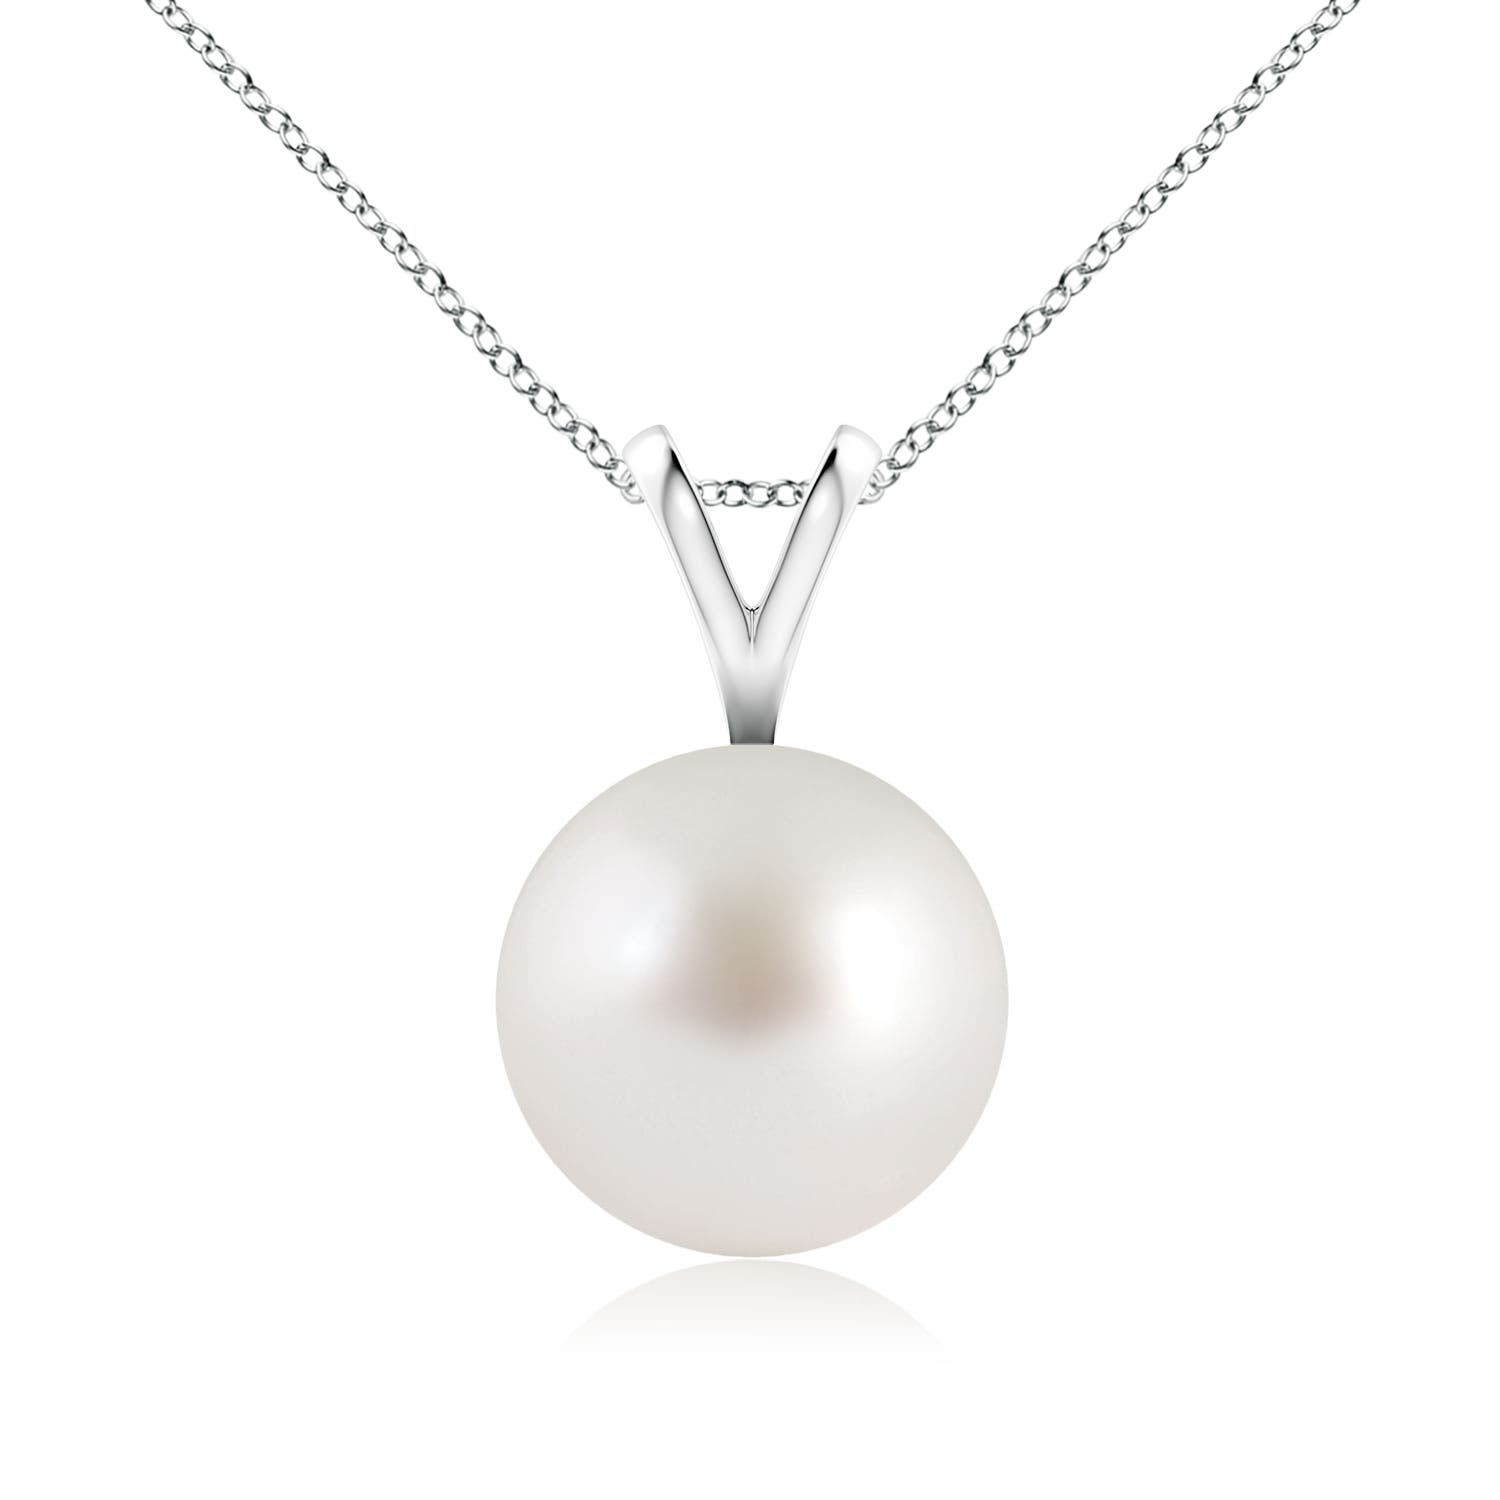 AAA - South Sea Cultured Pearl / 5.25 CT / 14 KT White Gold